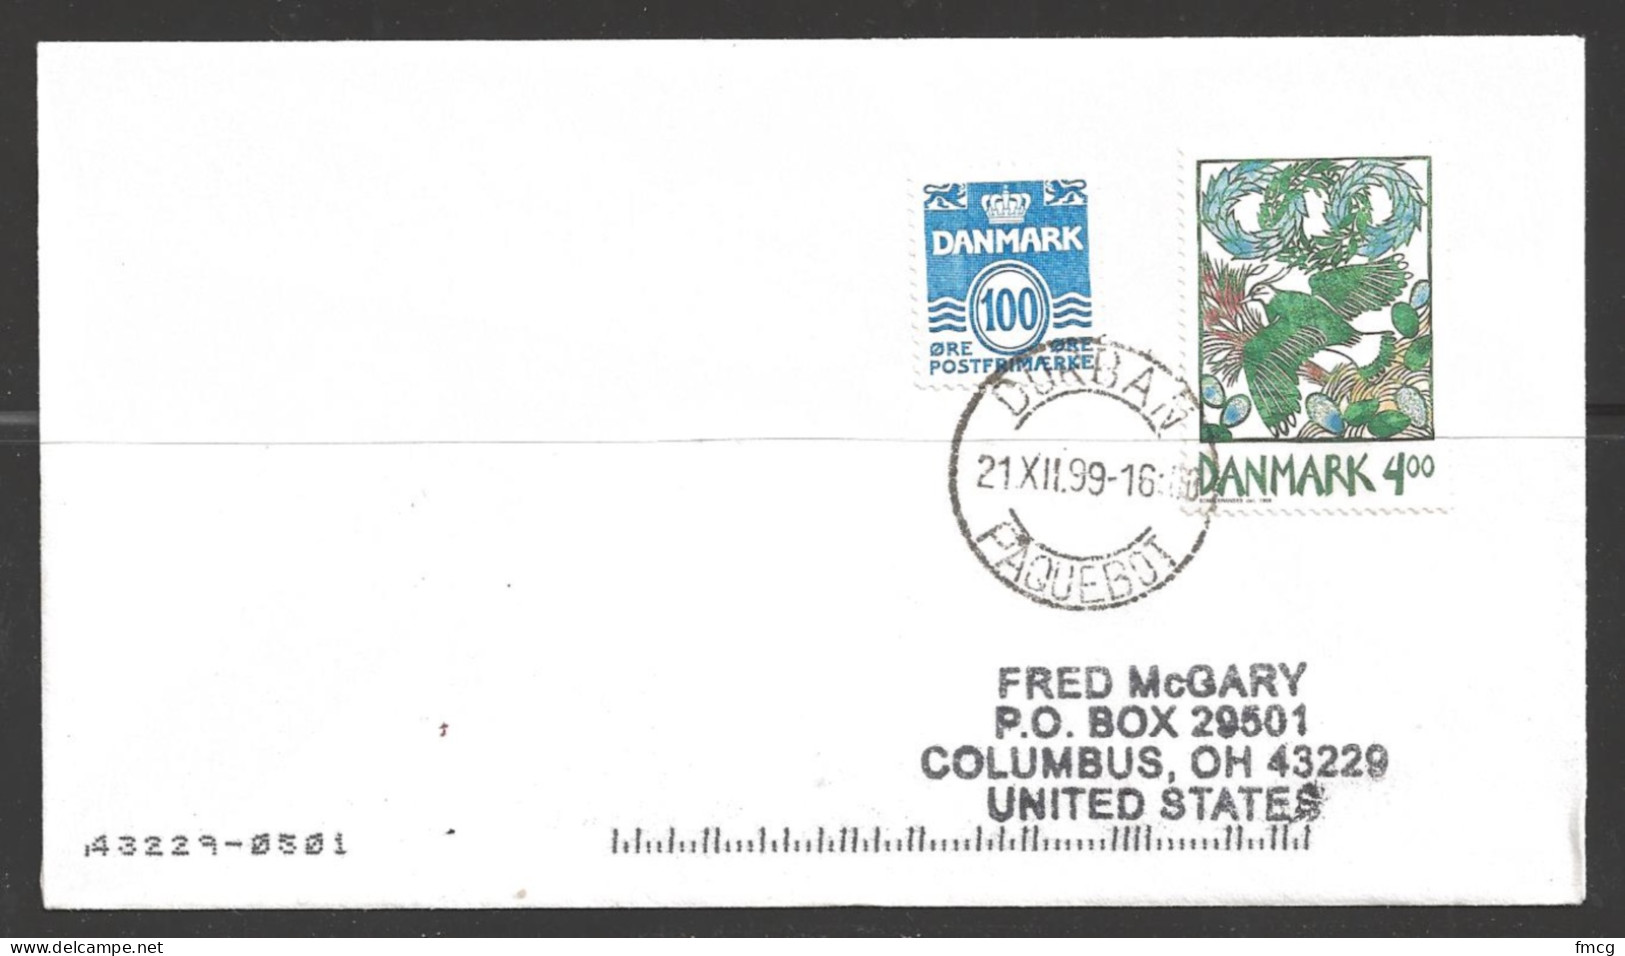 1999 Paquebot Cover, Denmark Stamps Used At Durban, South Africa - Covers & Documents